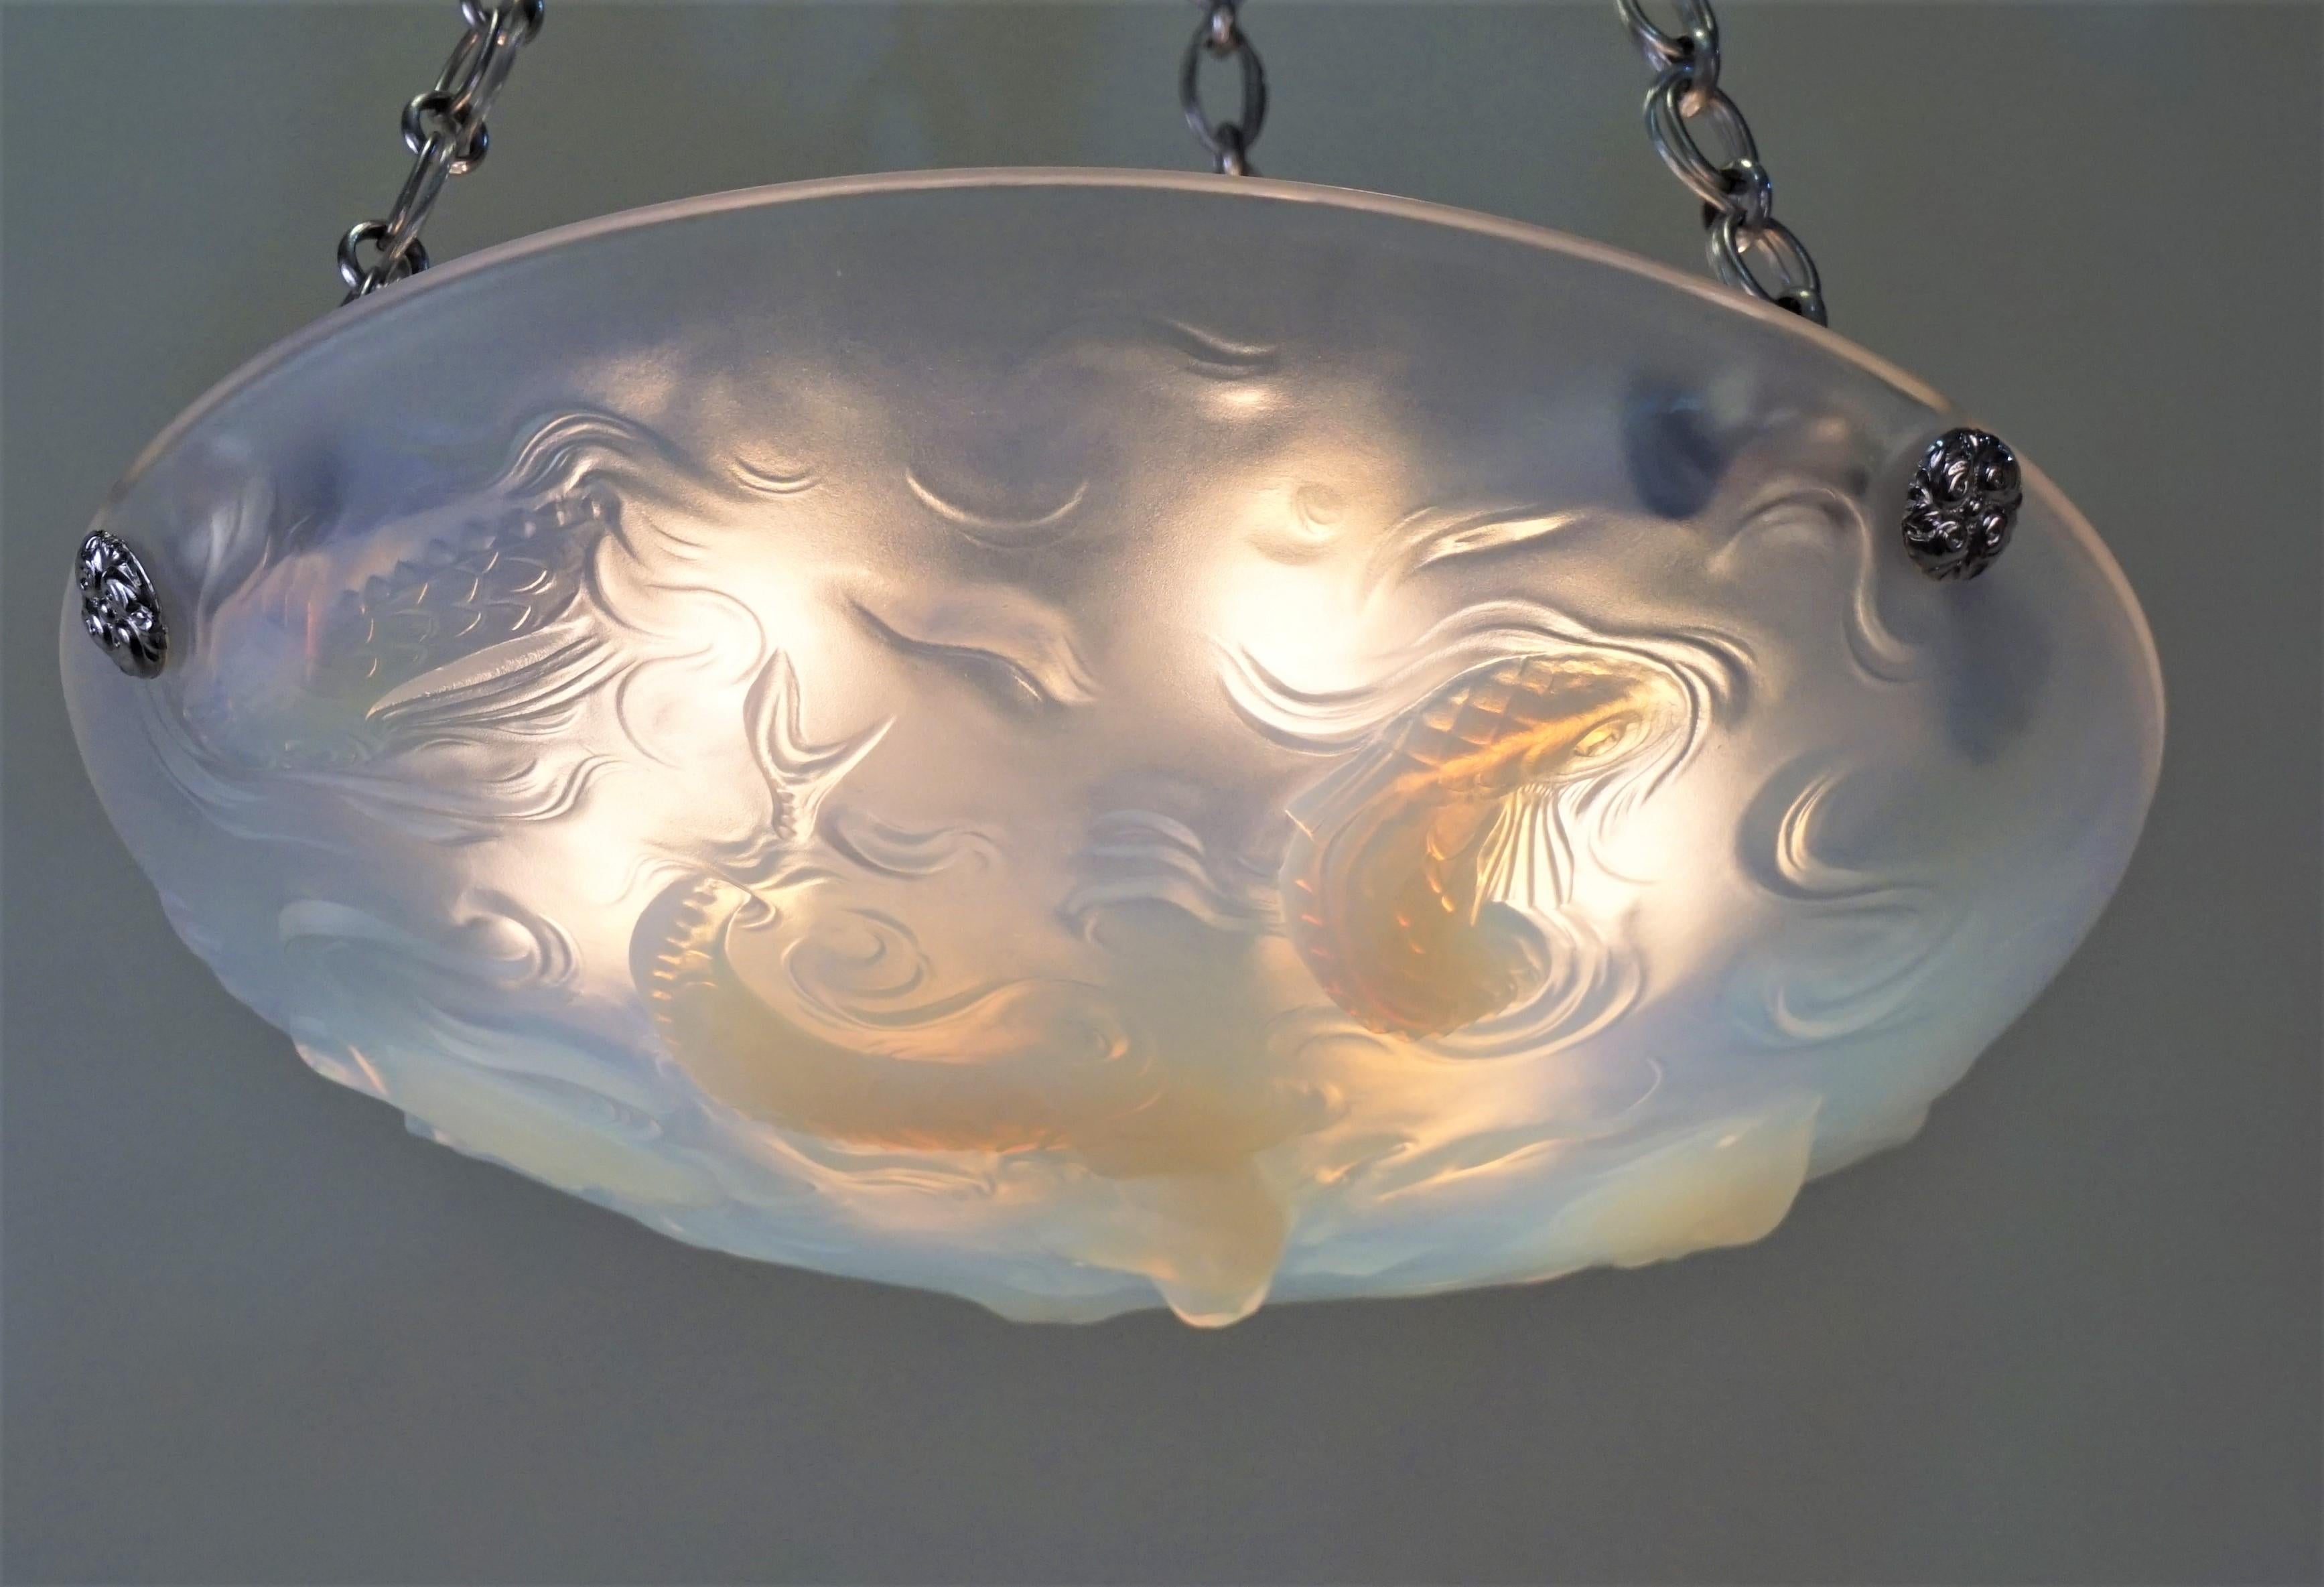 French Art Deco chandelier made honey blue opalescent glass with fish and mermaid swimming.
Six lights 60 watts max each